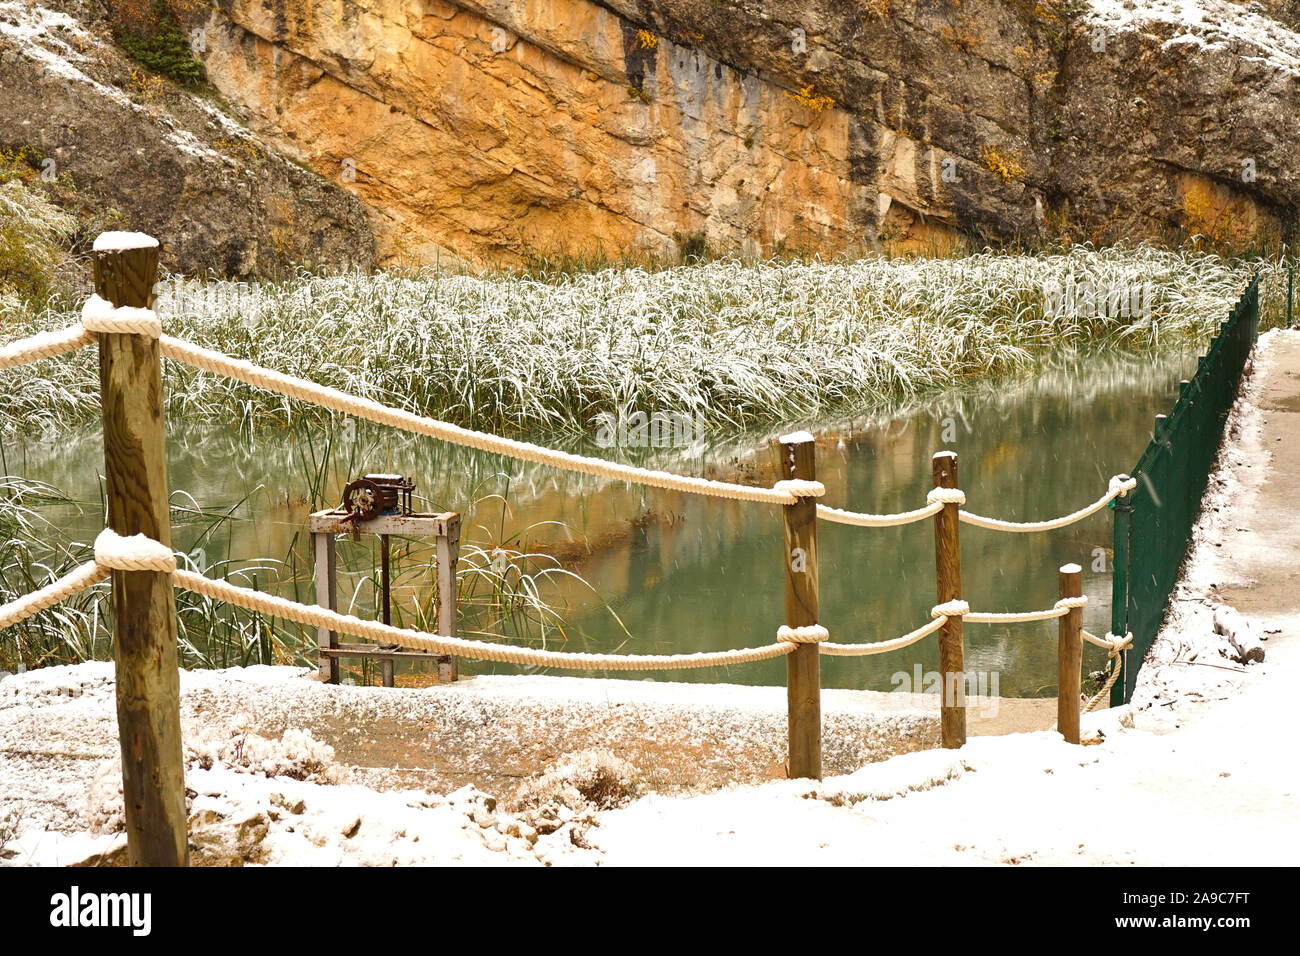 A dusting of snow on the long pond grass and rope fence at Sickle Canyon Stock Photo